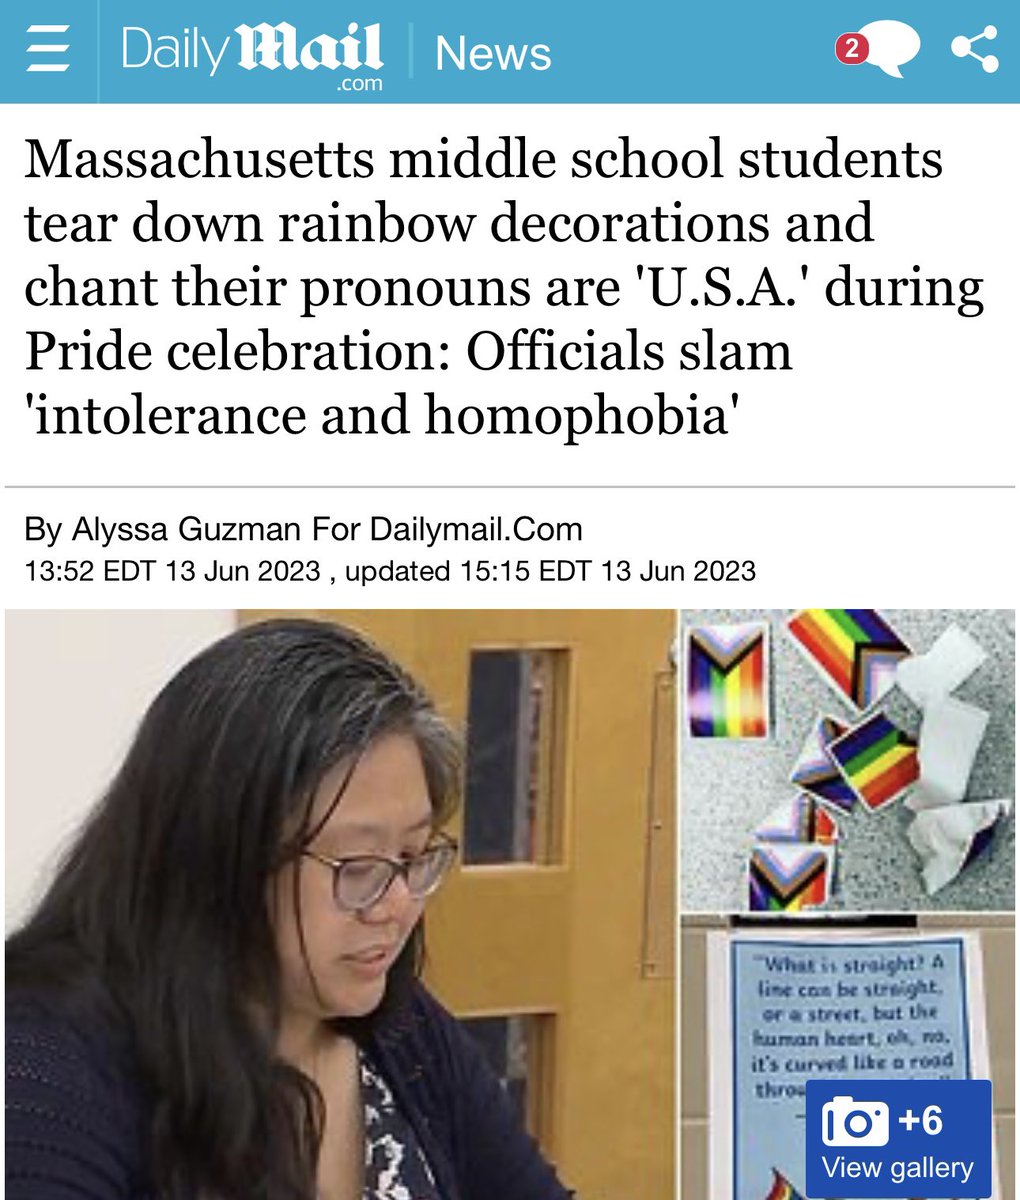 Massachusetts middle schoolers stage anti-Groomer protest in school after being told to wear Pride clothing

Decked out in red, white and blue, the students tore down decorations & chanted their pronouns were “U S A”

Parents said students felt forced to participate and were…